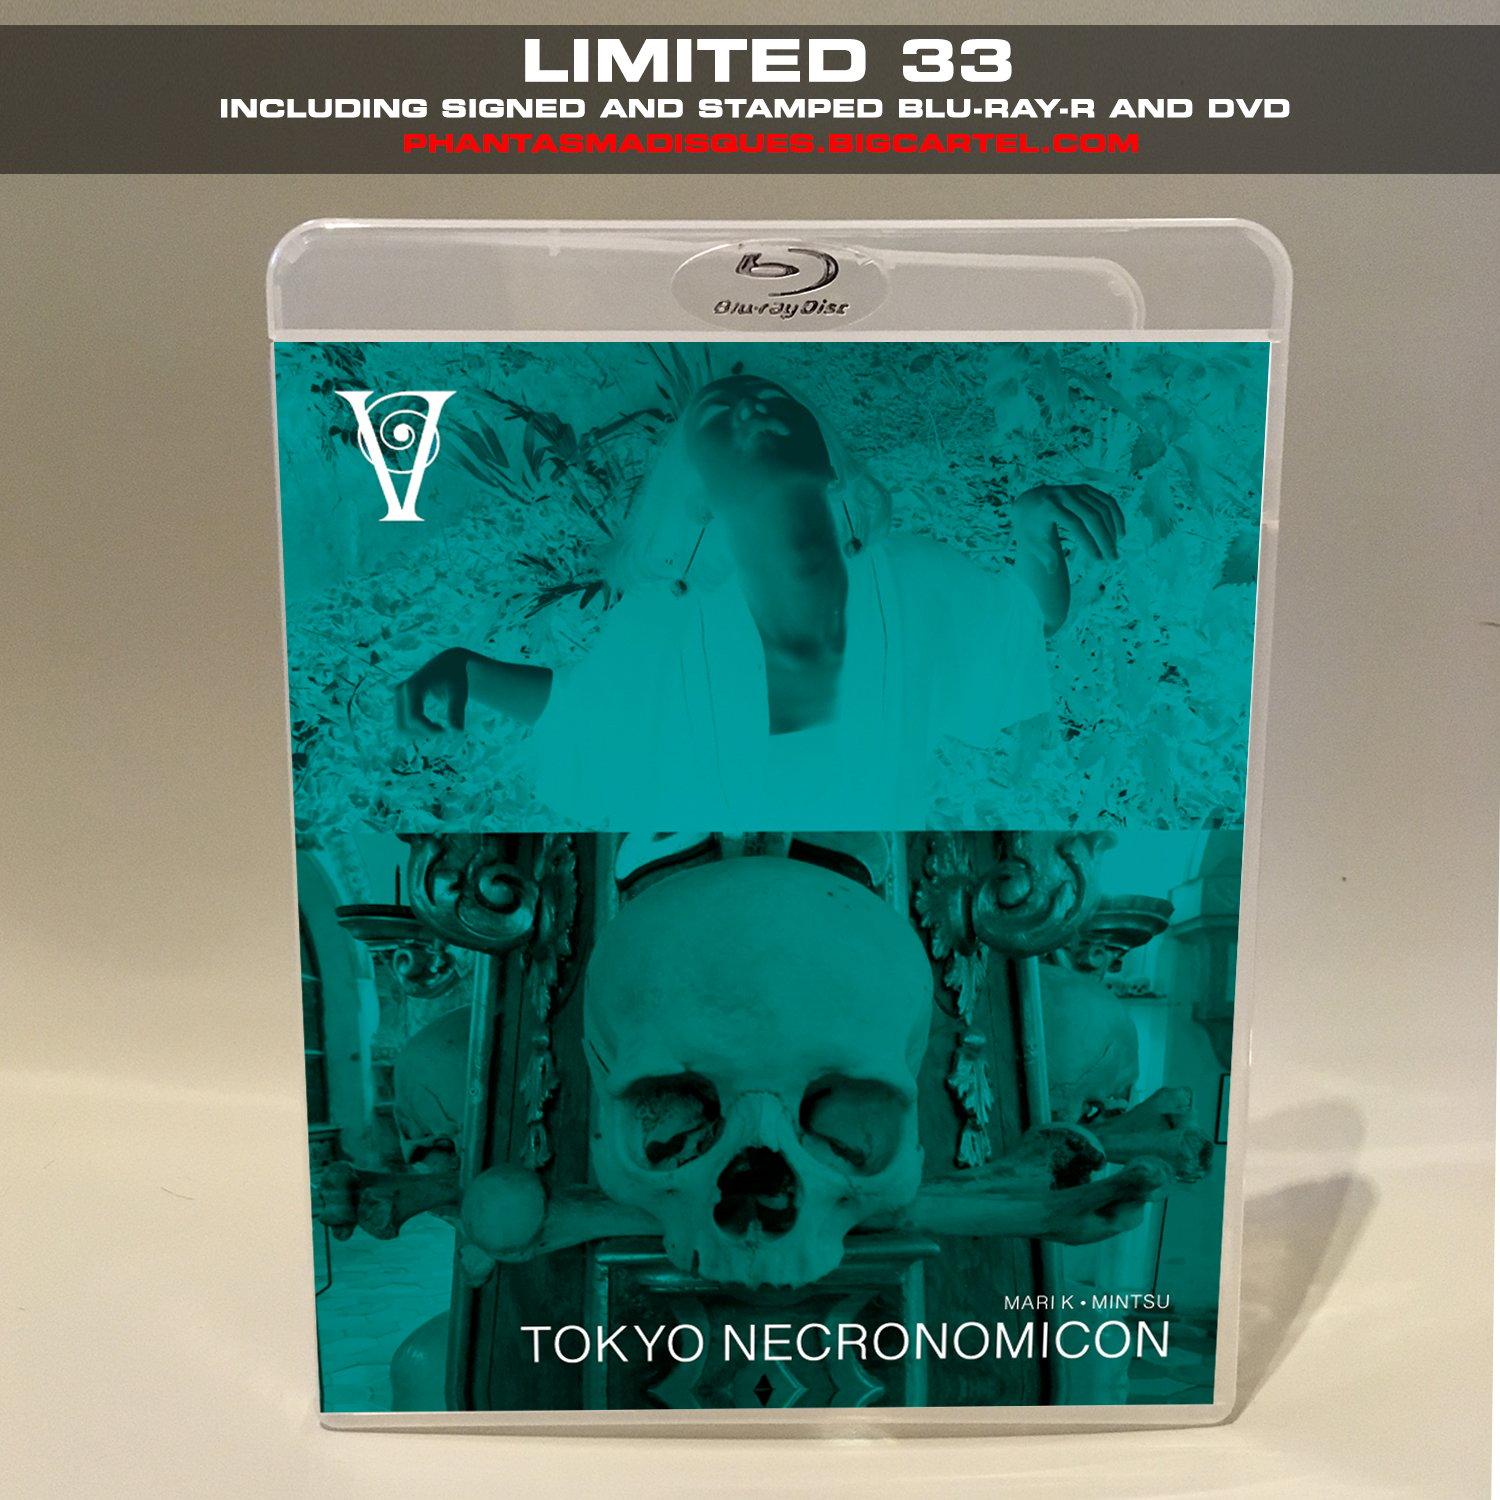 TOKYO NECRONOMICON - LIMITED 33 SIGNED/STAMPED BLU-RAY-R + DVD (DESIGN B)